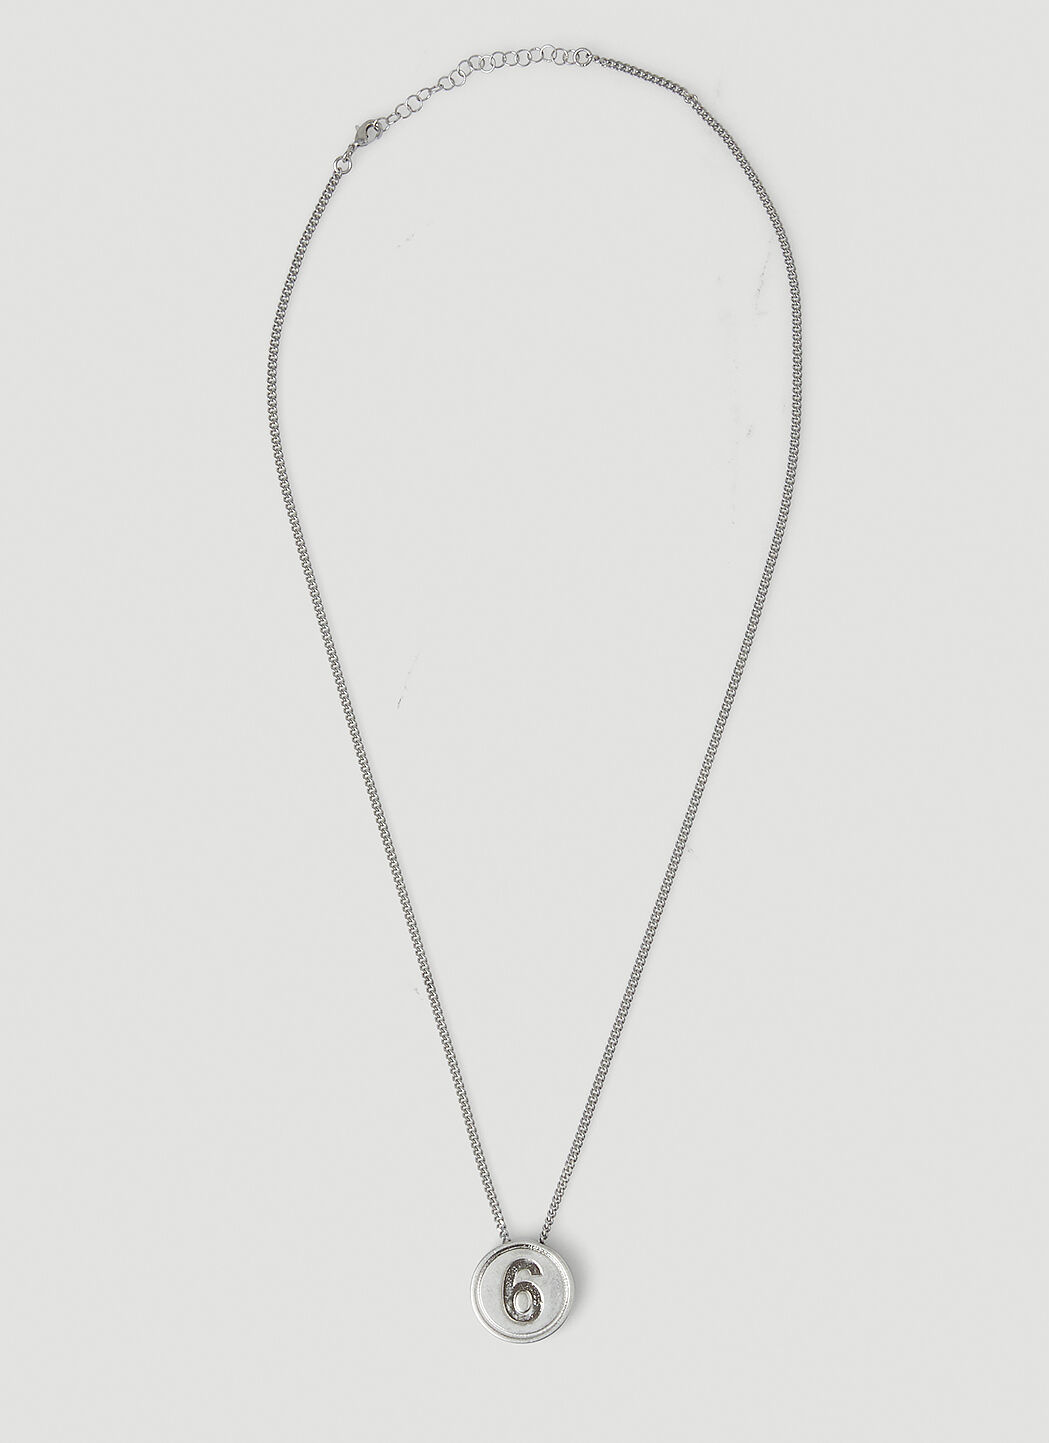 Maison Margiela 11 Necklace (12.895 UYU) ❤ liked on Polyvore featuring  jewelry, necklaces, accessories, colares, silver, m… | Necklace, Jewelry  accessories, Jewelry